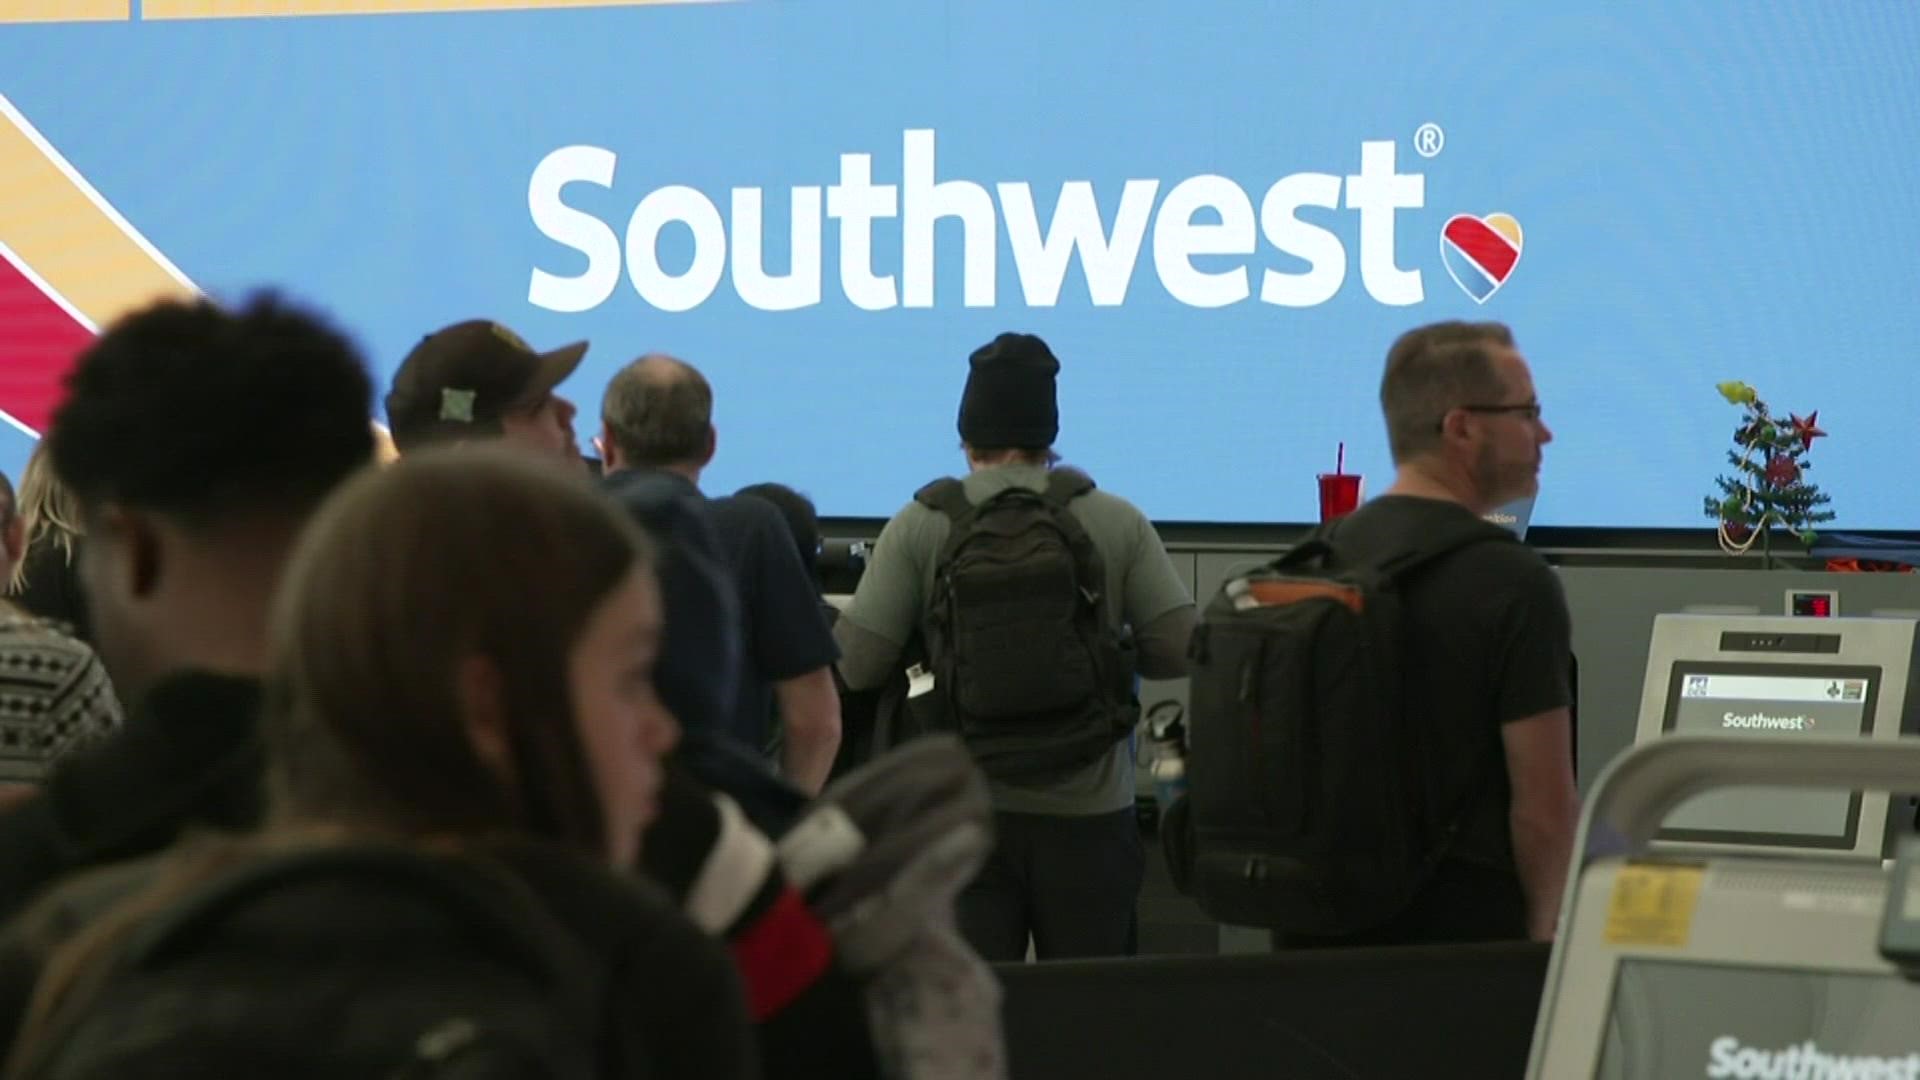 Southwest expects a net loss in the fourth quarter driven primarily by the operational disruption.